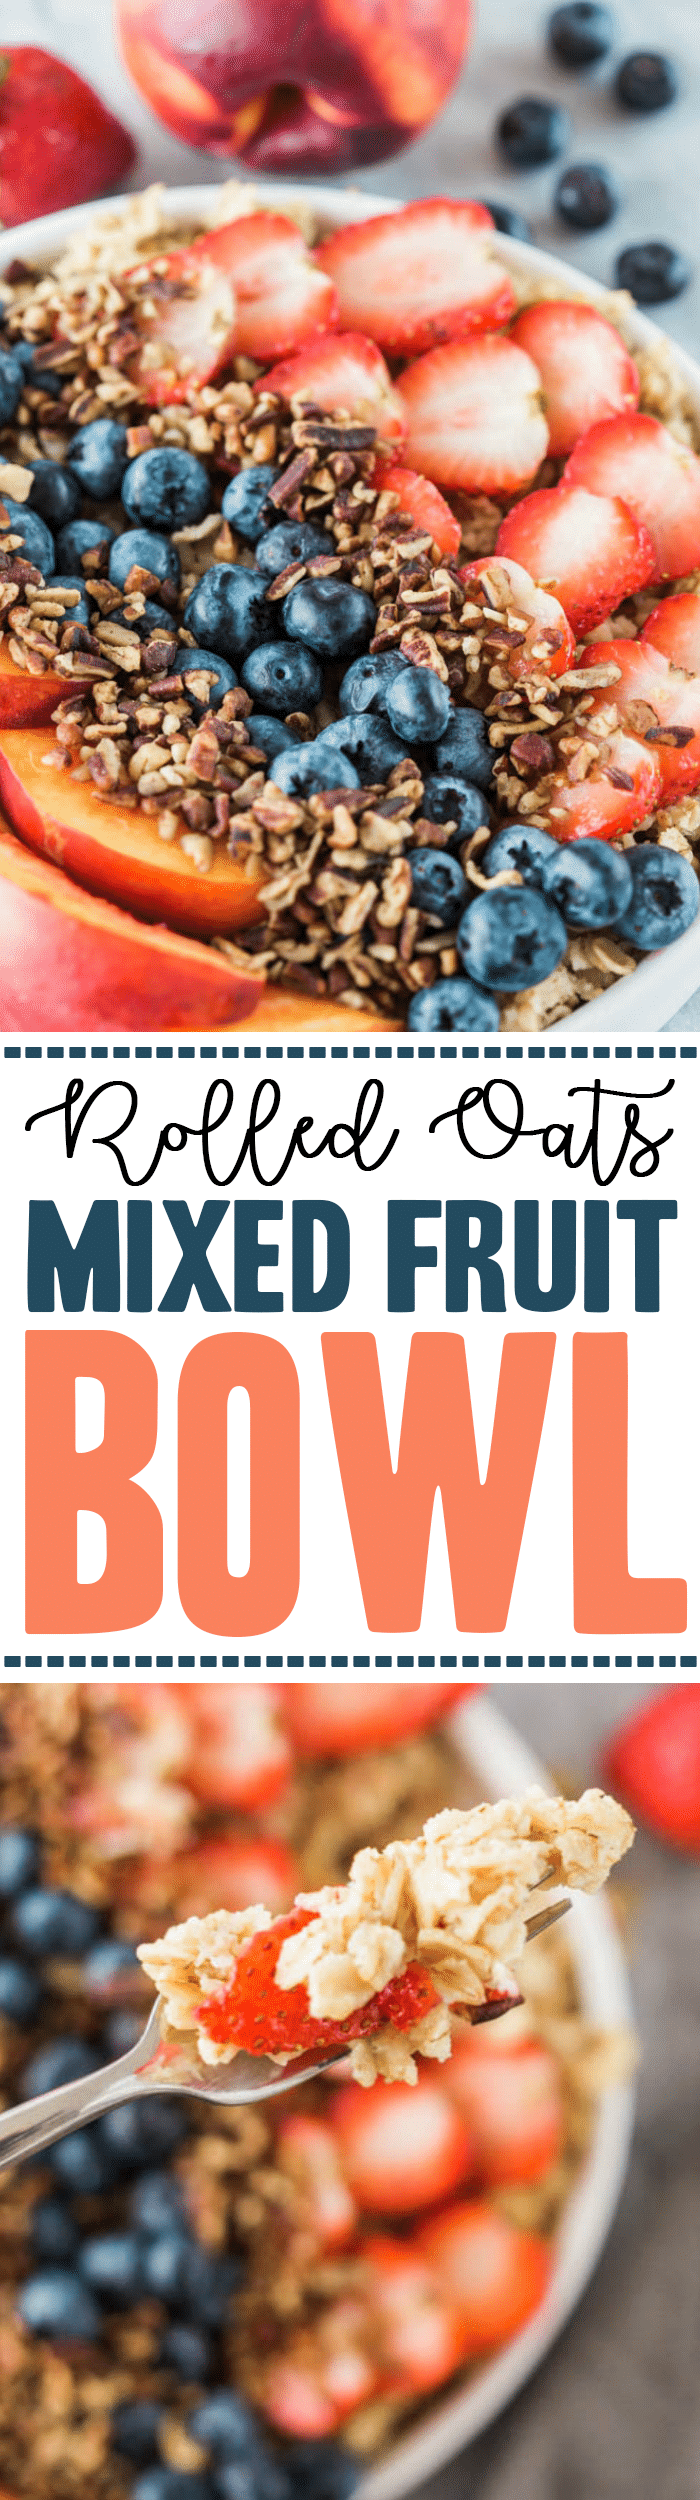 gluten free Rolled Oats Fruit and Nut Bowl - low carb breakfast bowl recipe with strawberries, blueberries, walnuts, and nectarines 